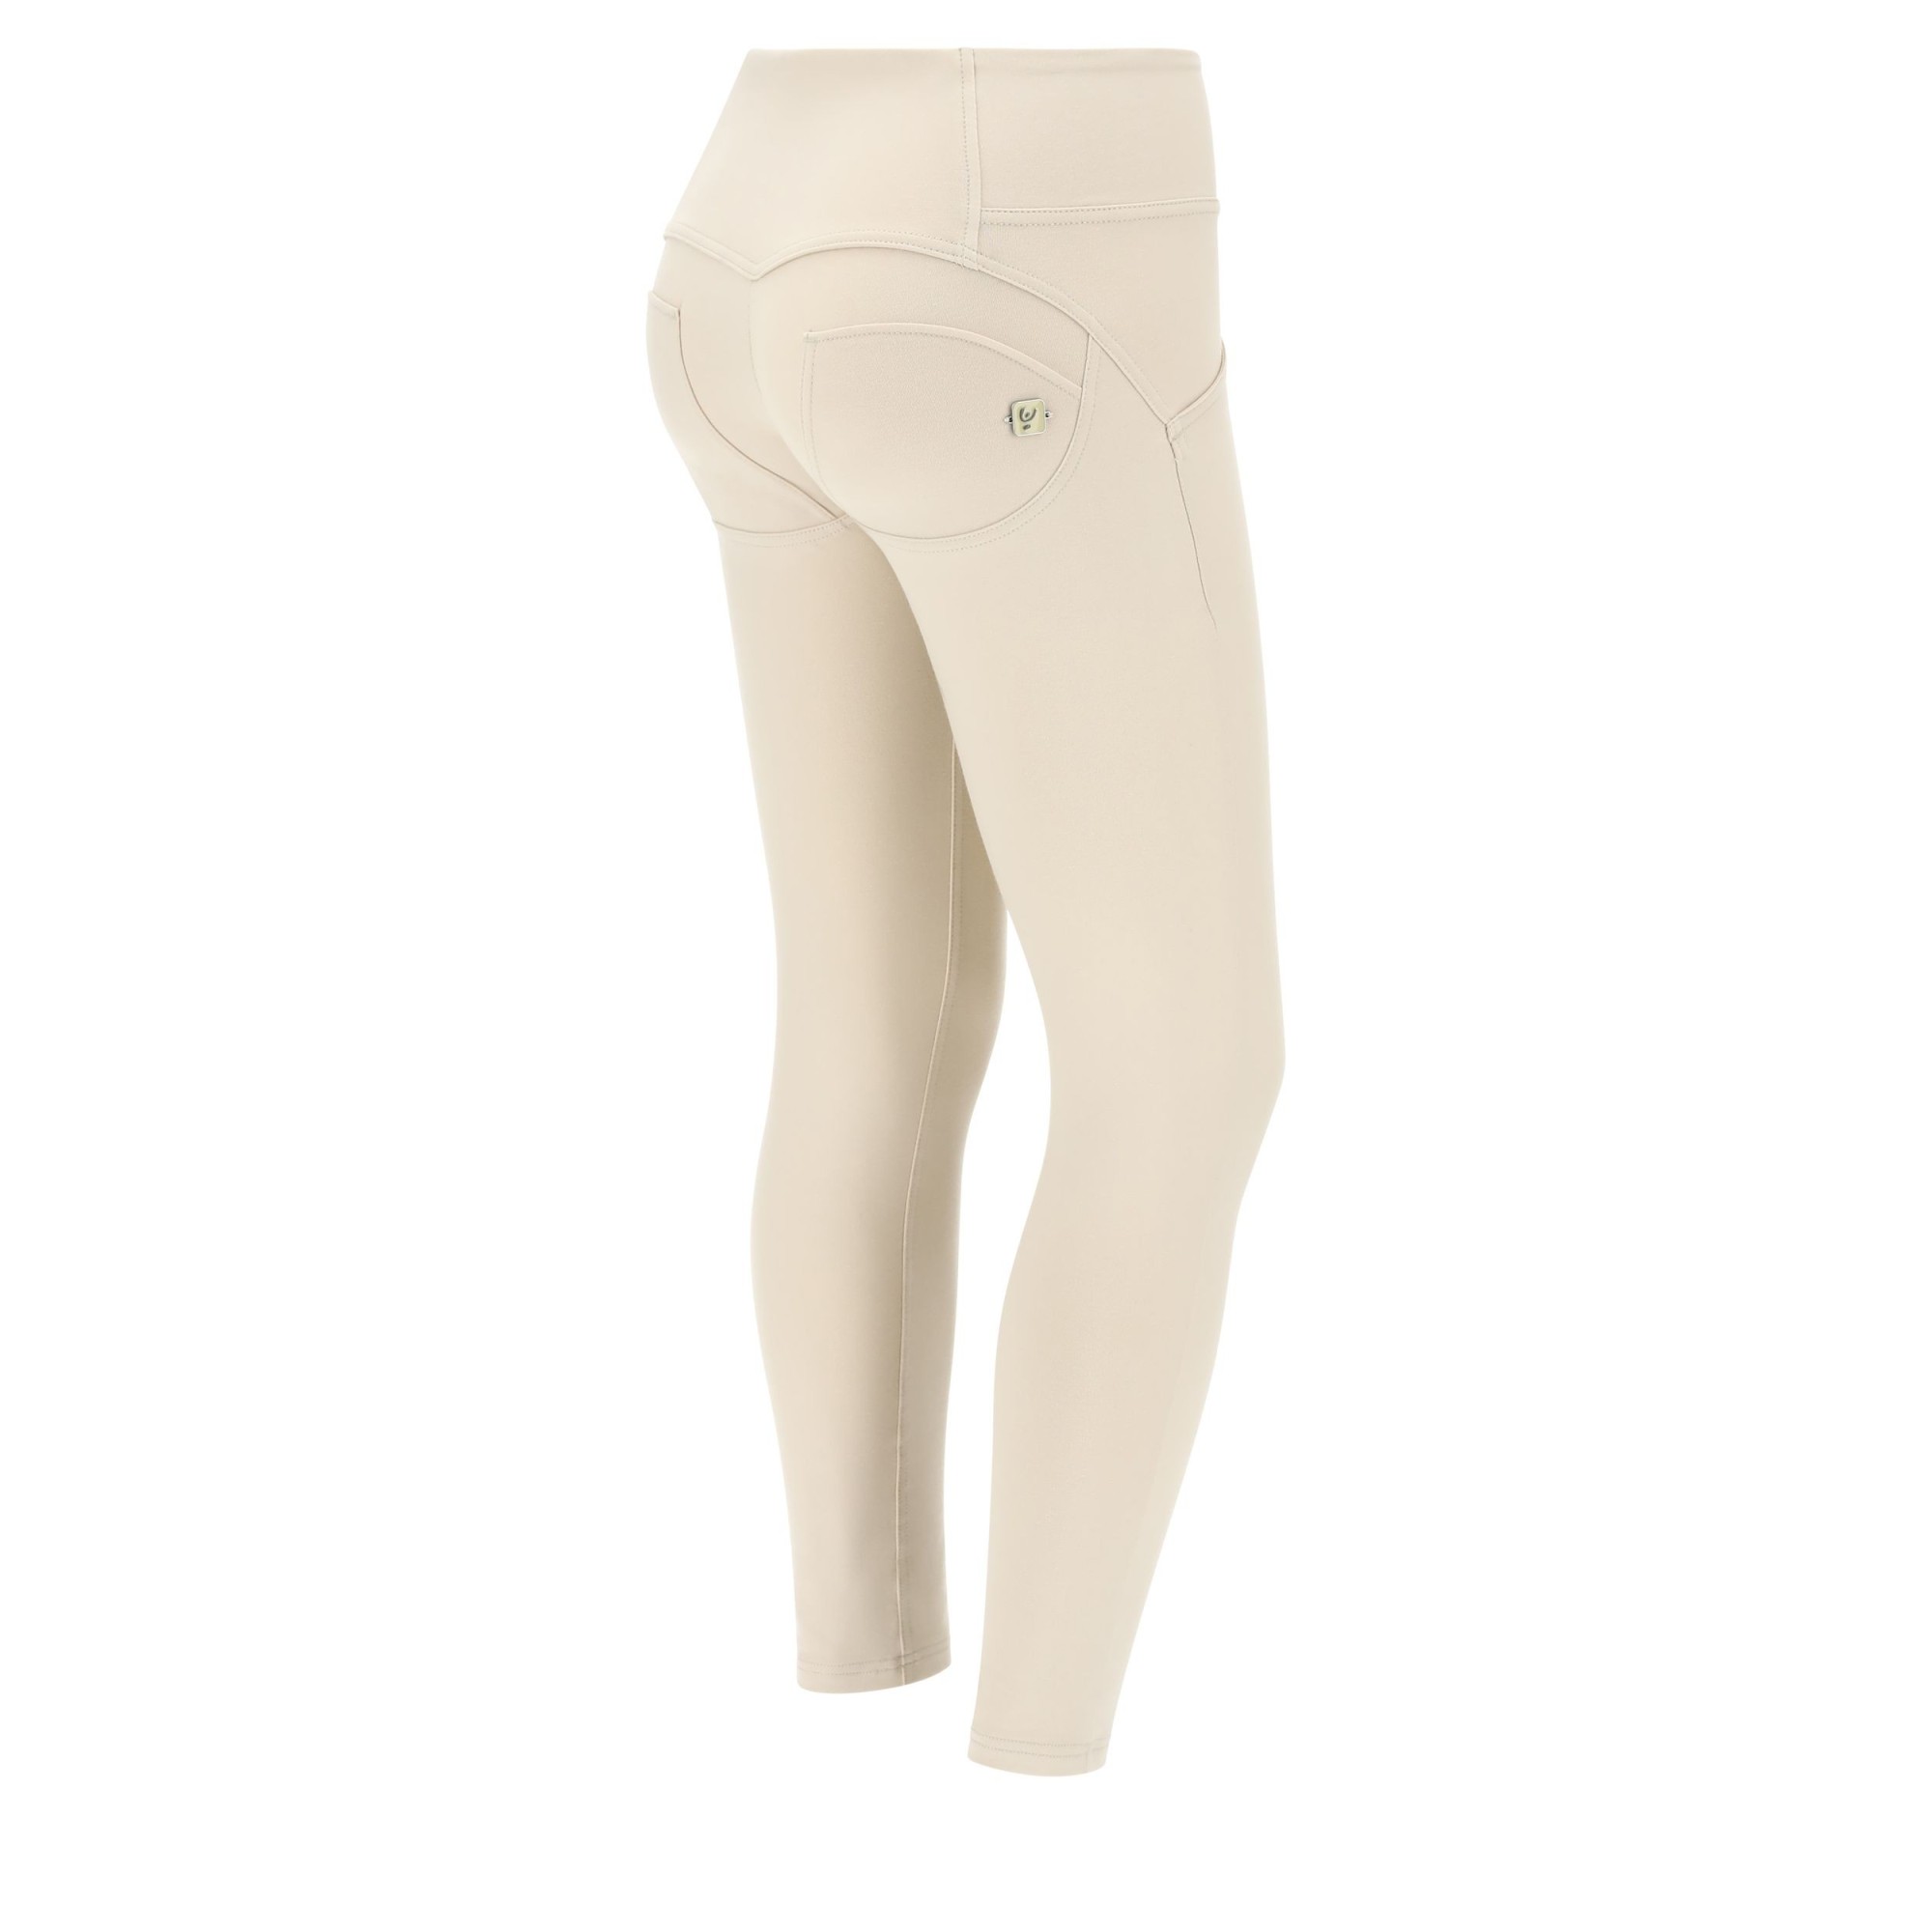 Milano rib trousers with a contrast waistband and bands - P80N